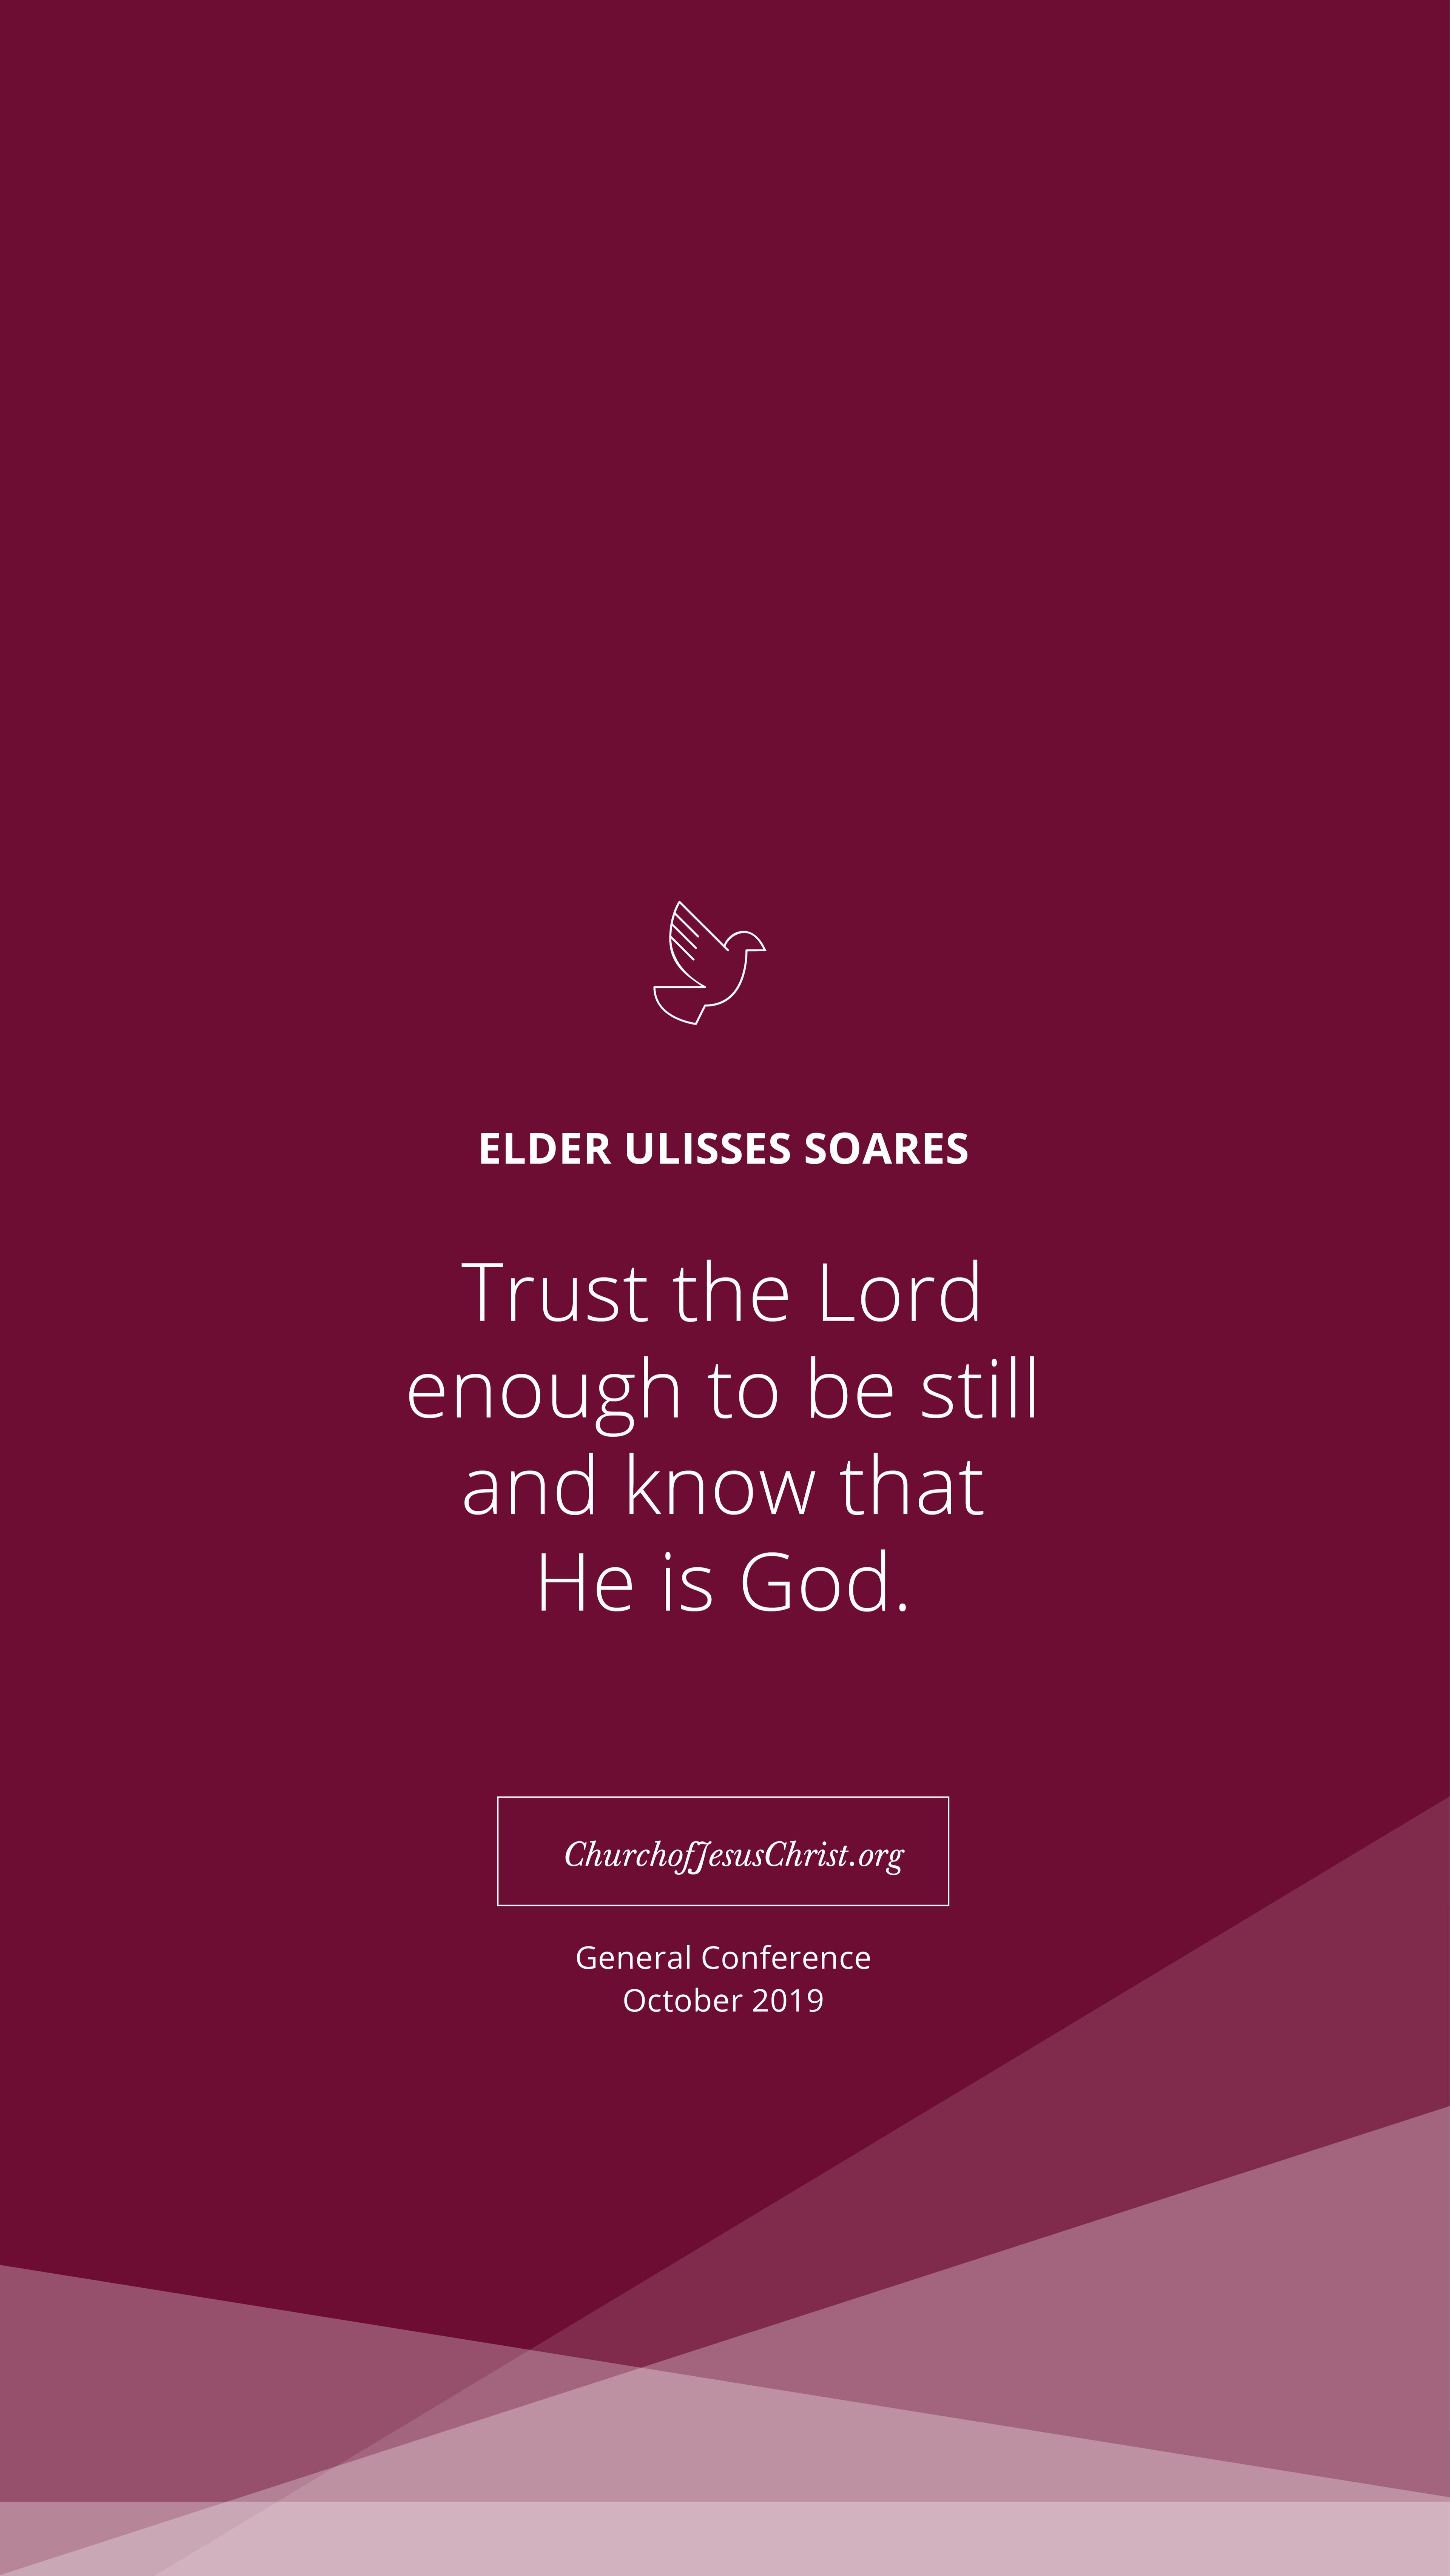 “Trust the Lord enough to be still and know that He is God.”—Ulisses Soares